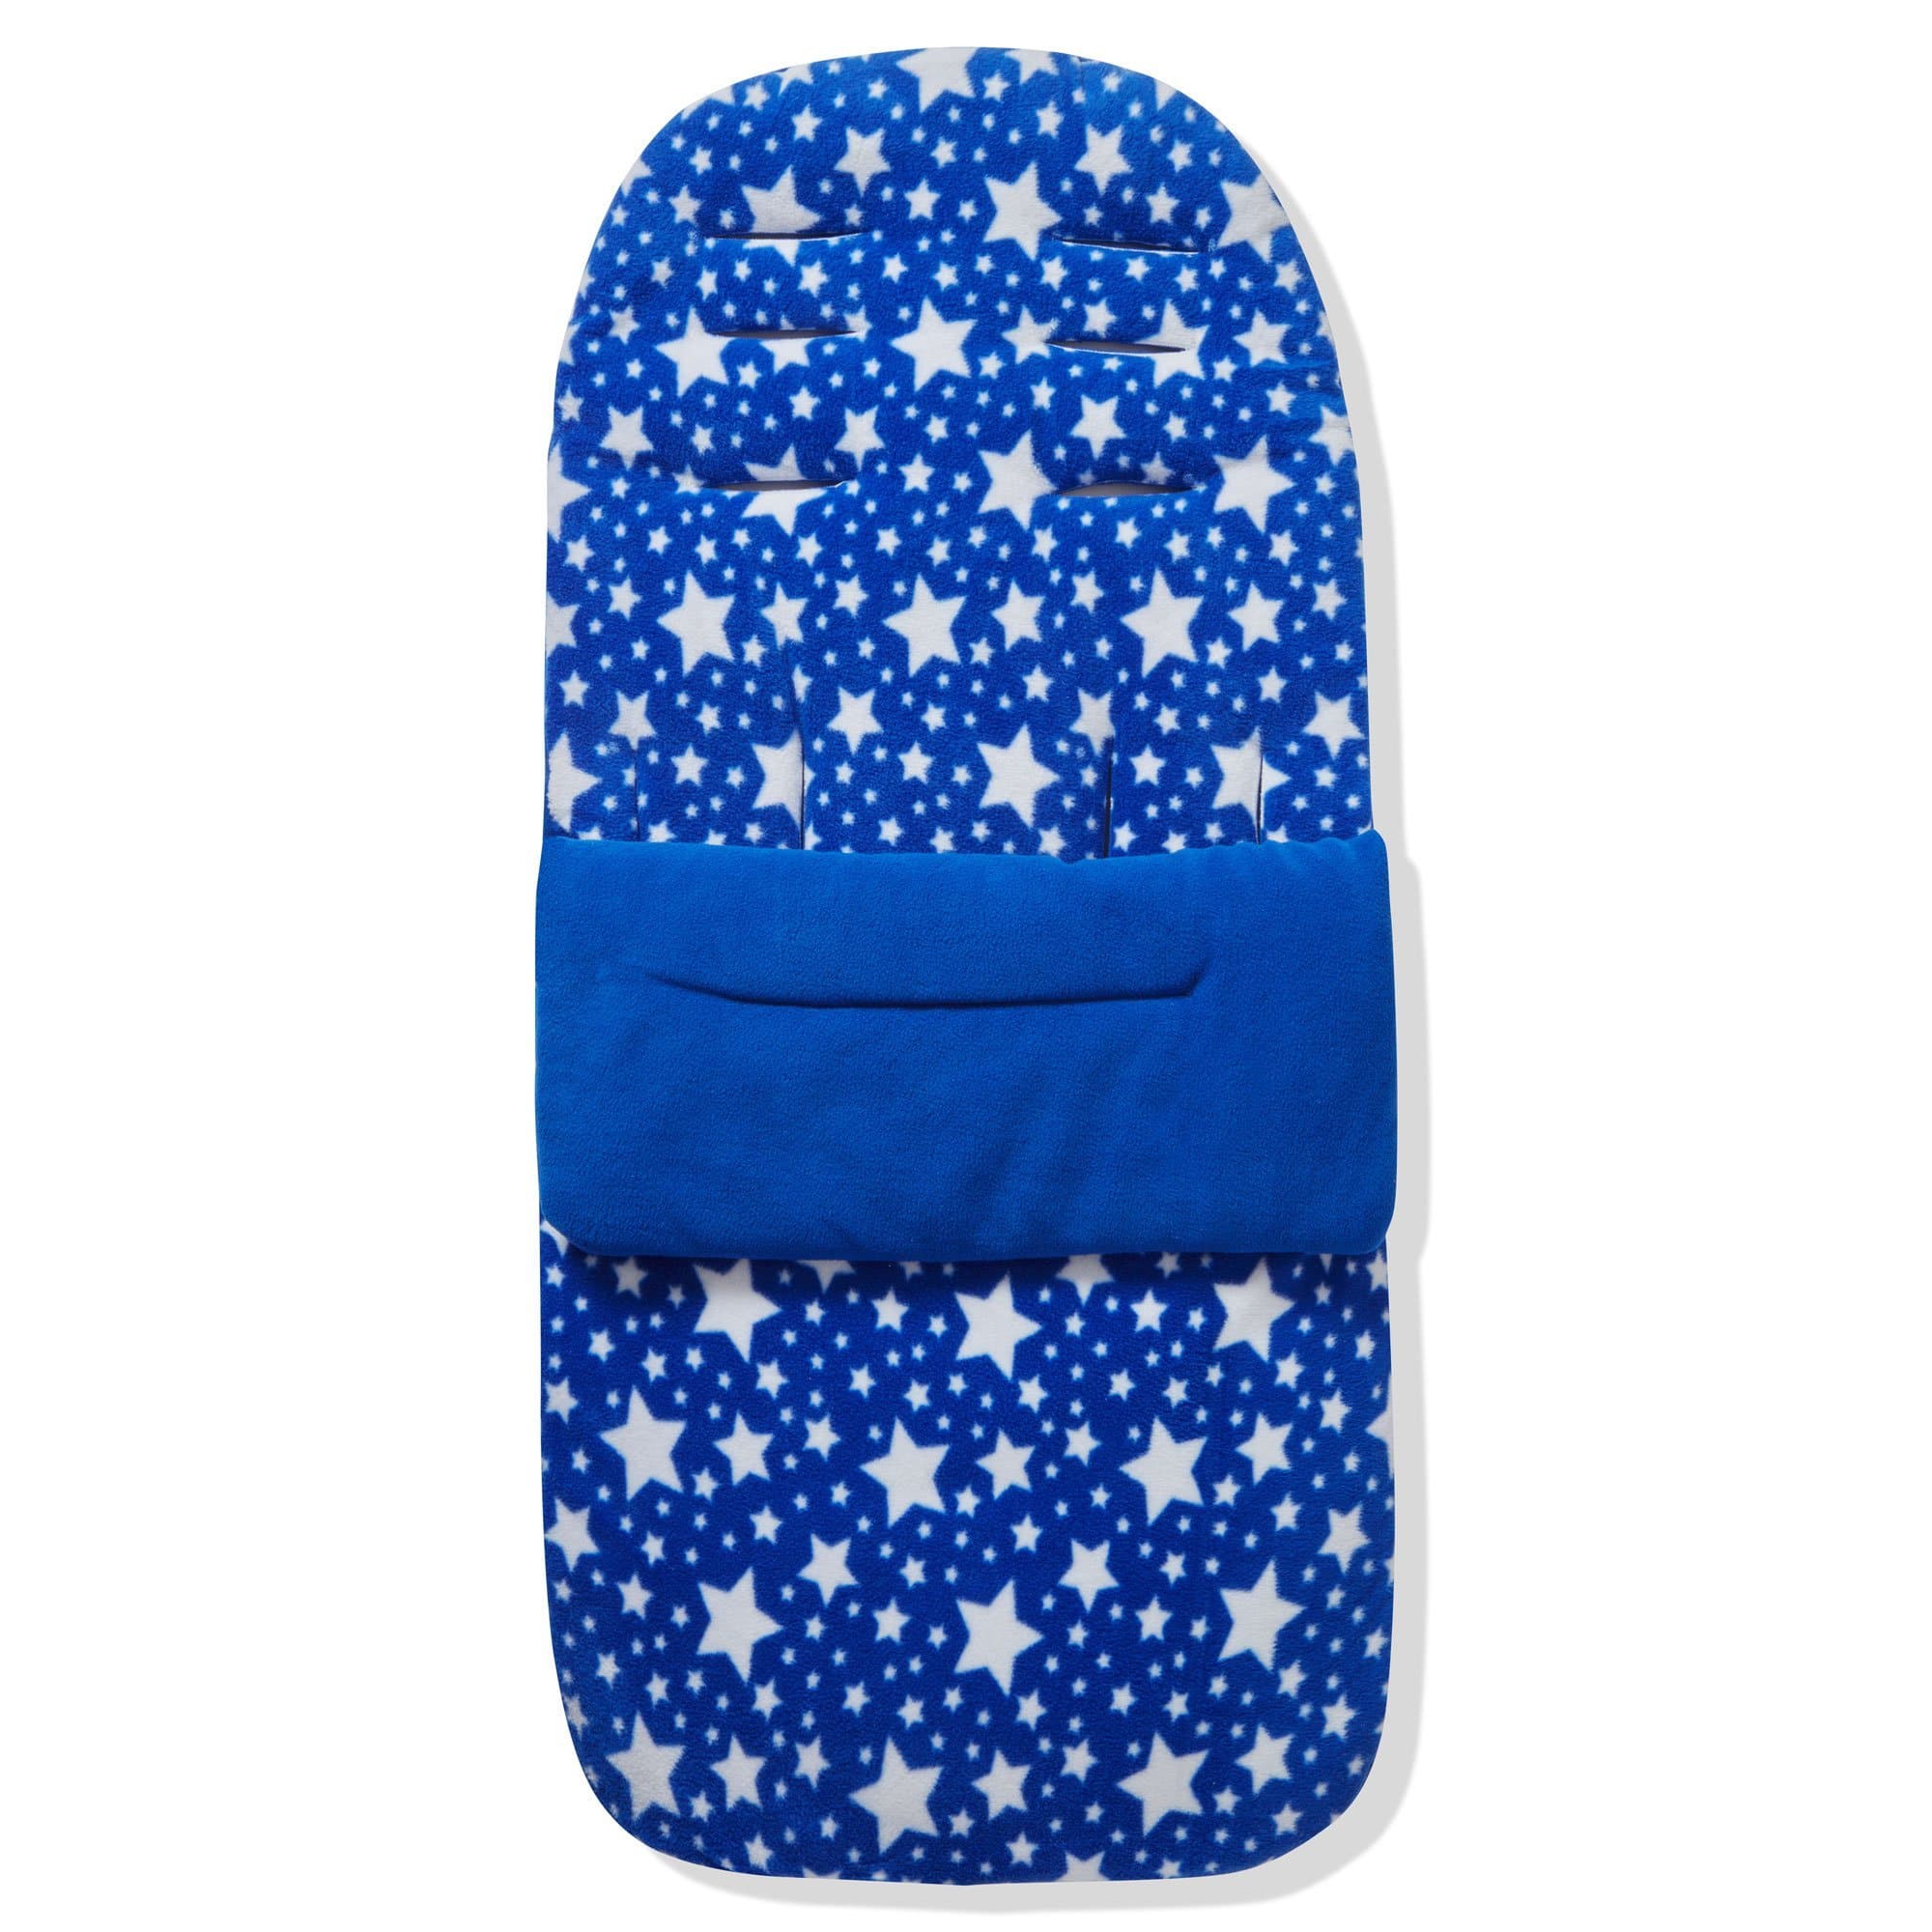 Fleece Footmuff / Cosy Toes Compatible with Looping - For Your Little One